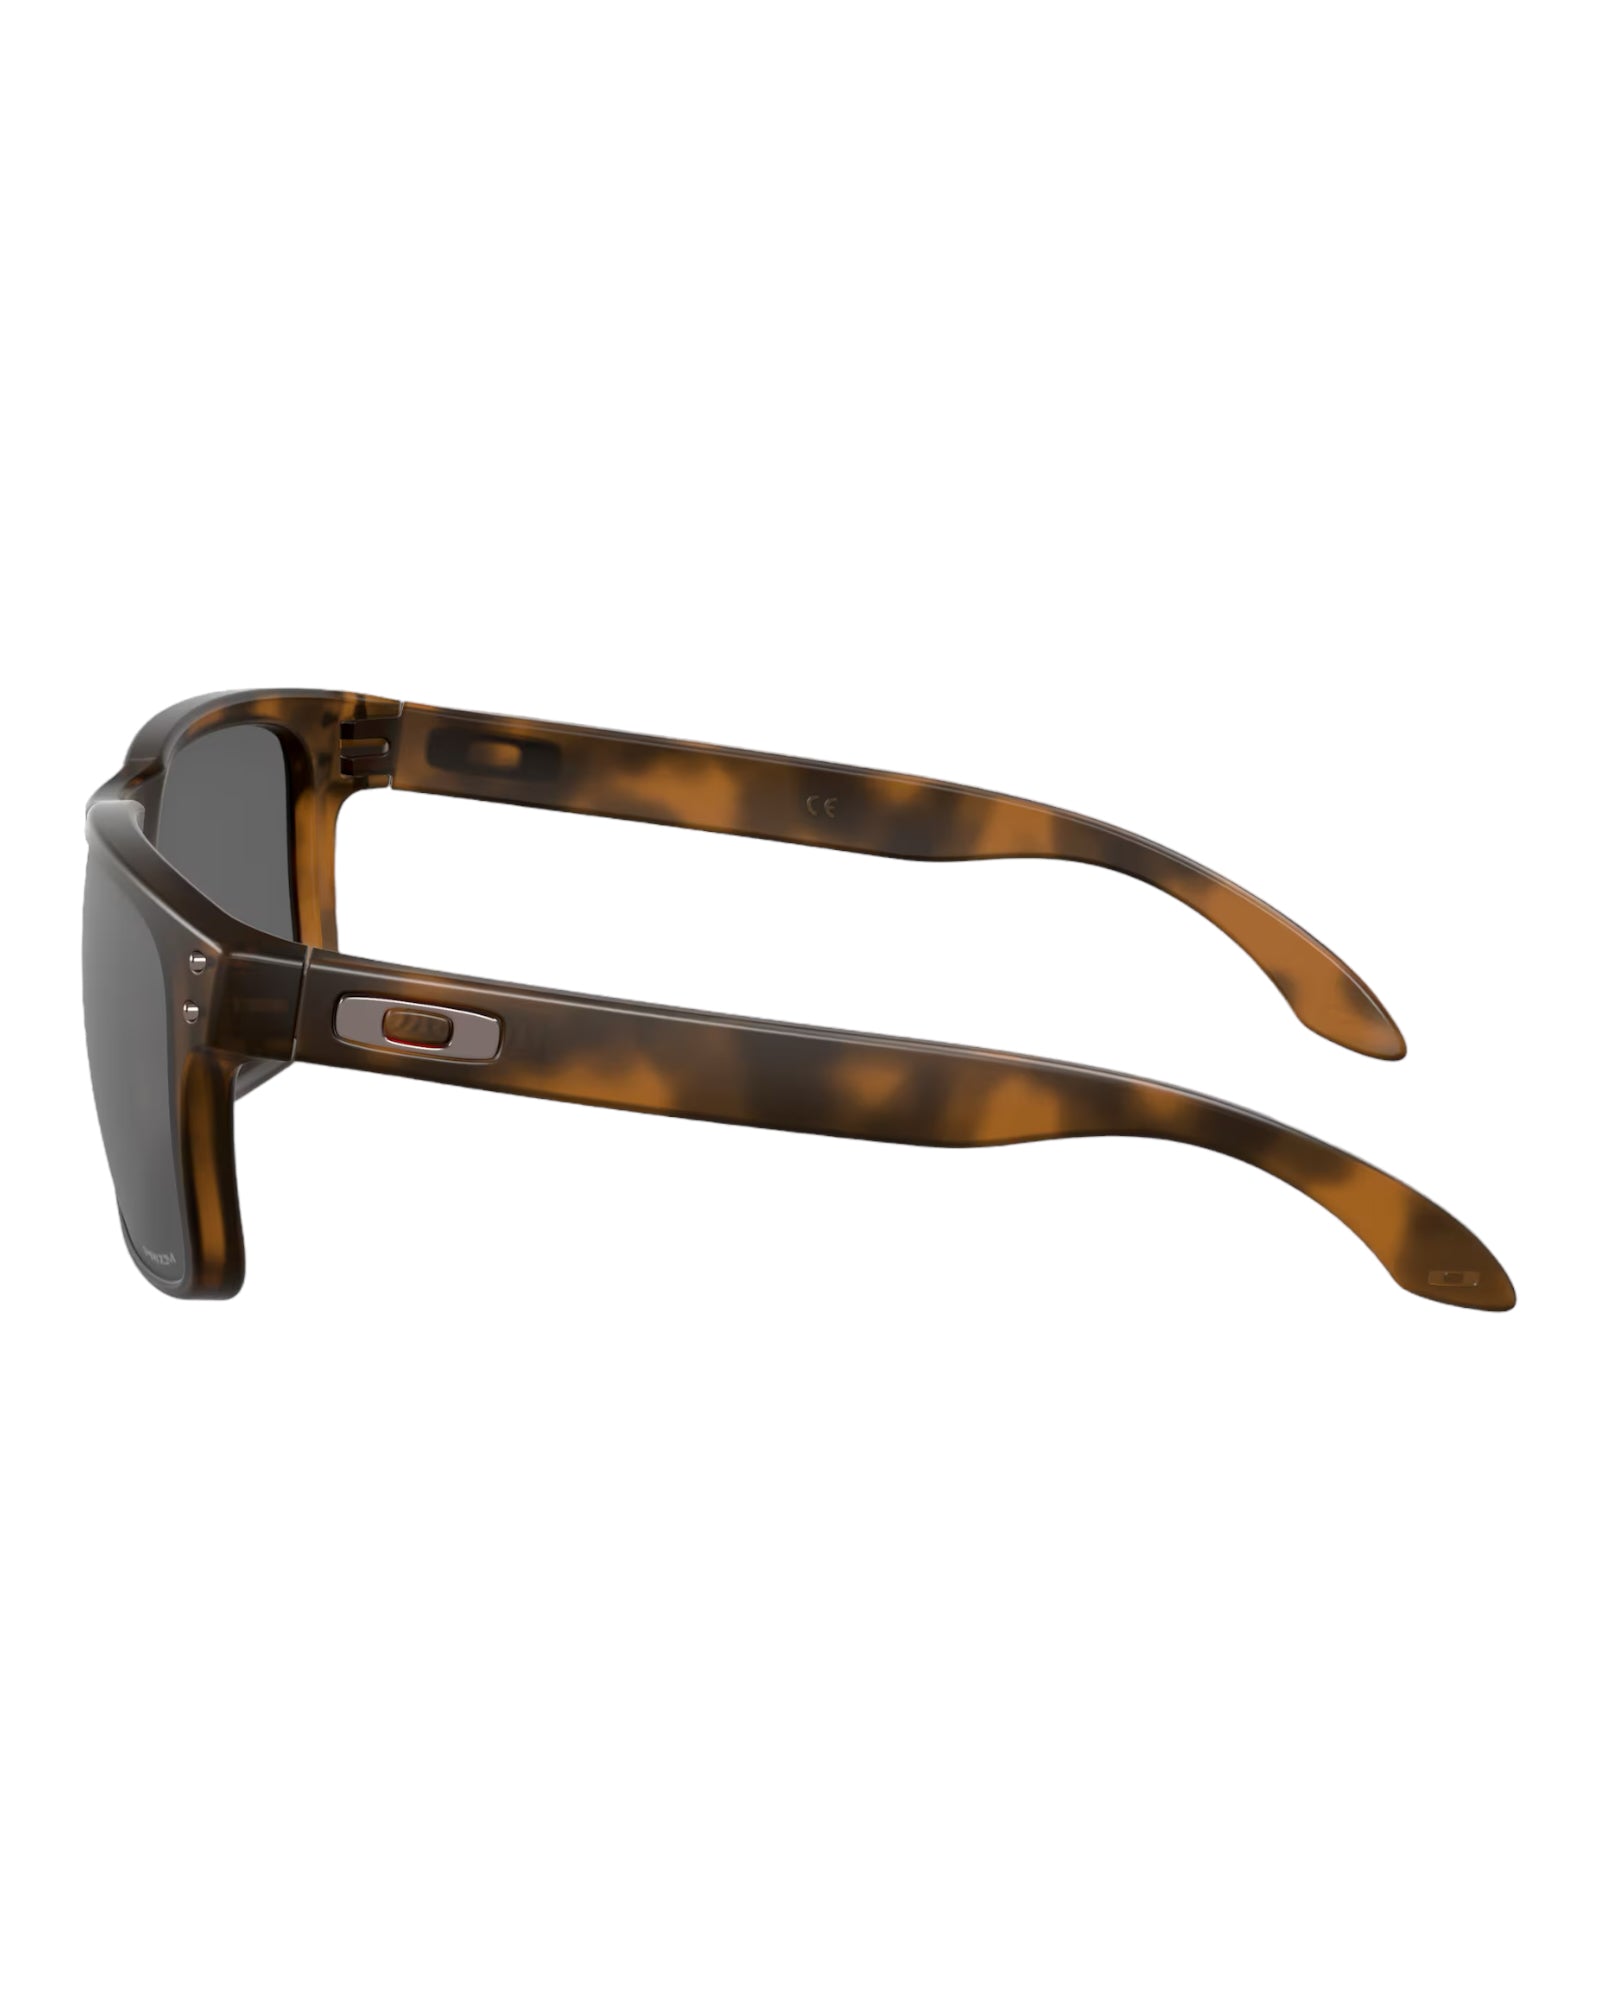 Holbrook is a timeless, classic design fused with modern Oakley technology. 